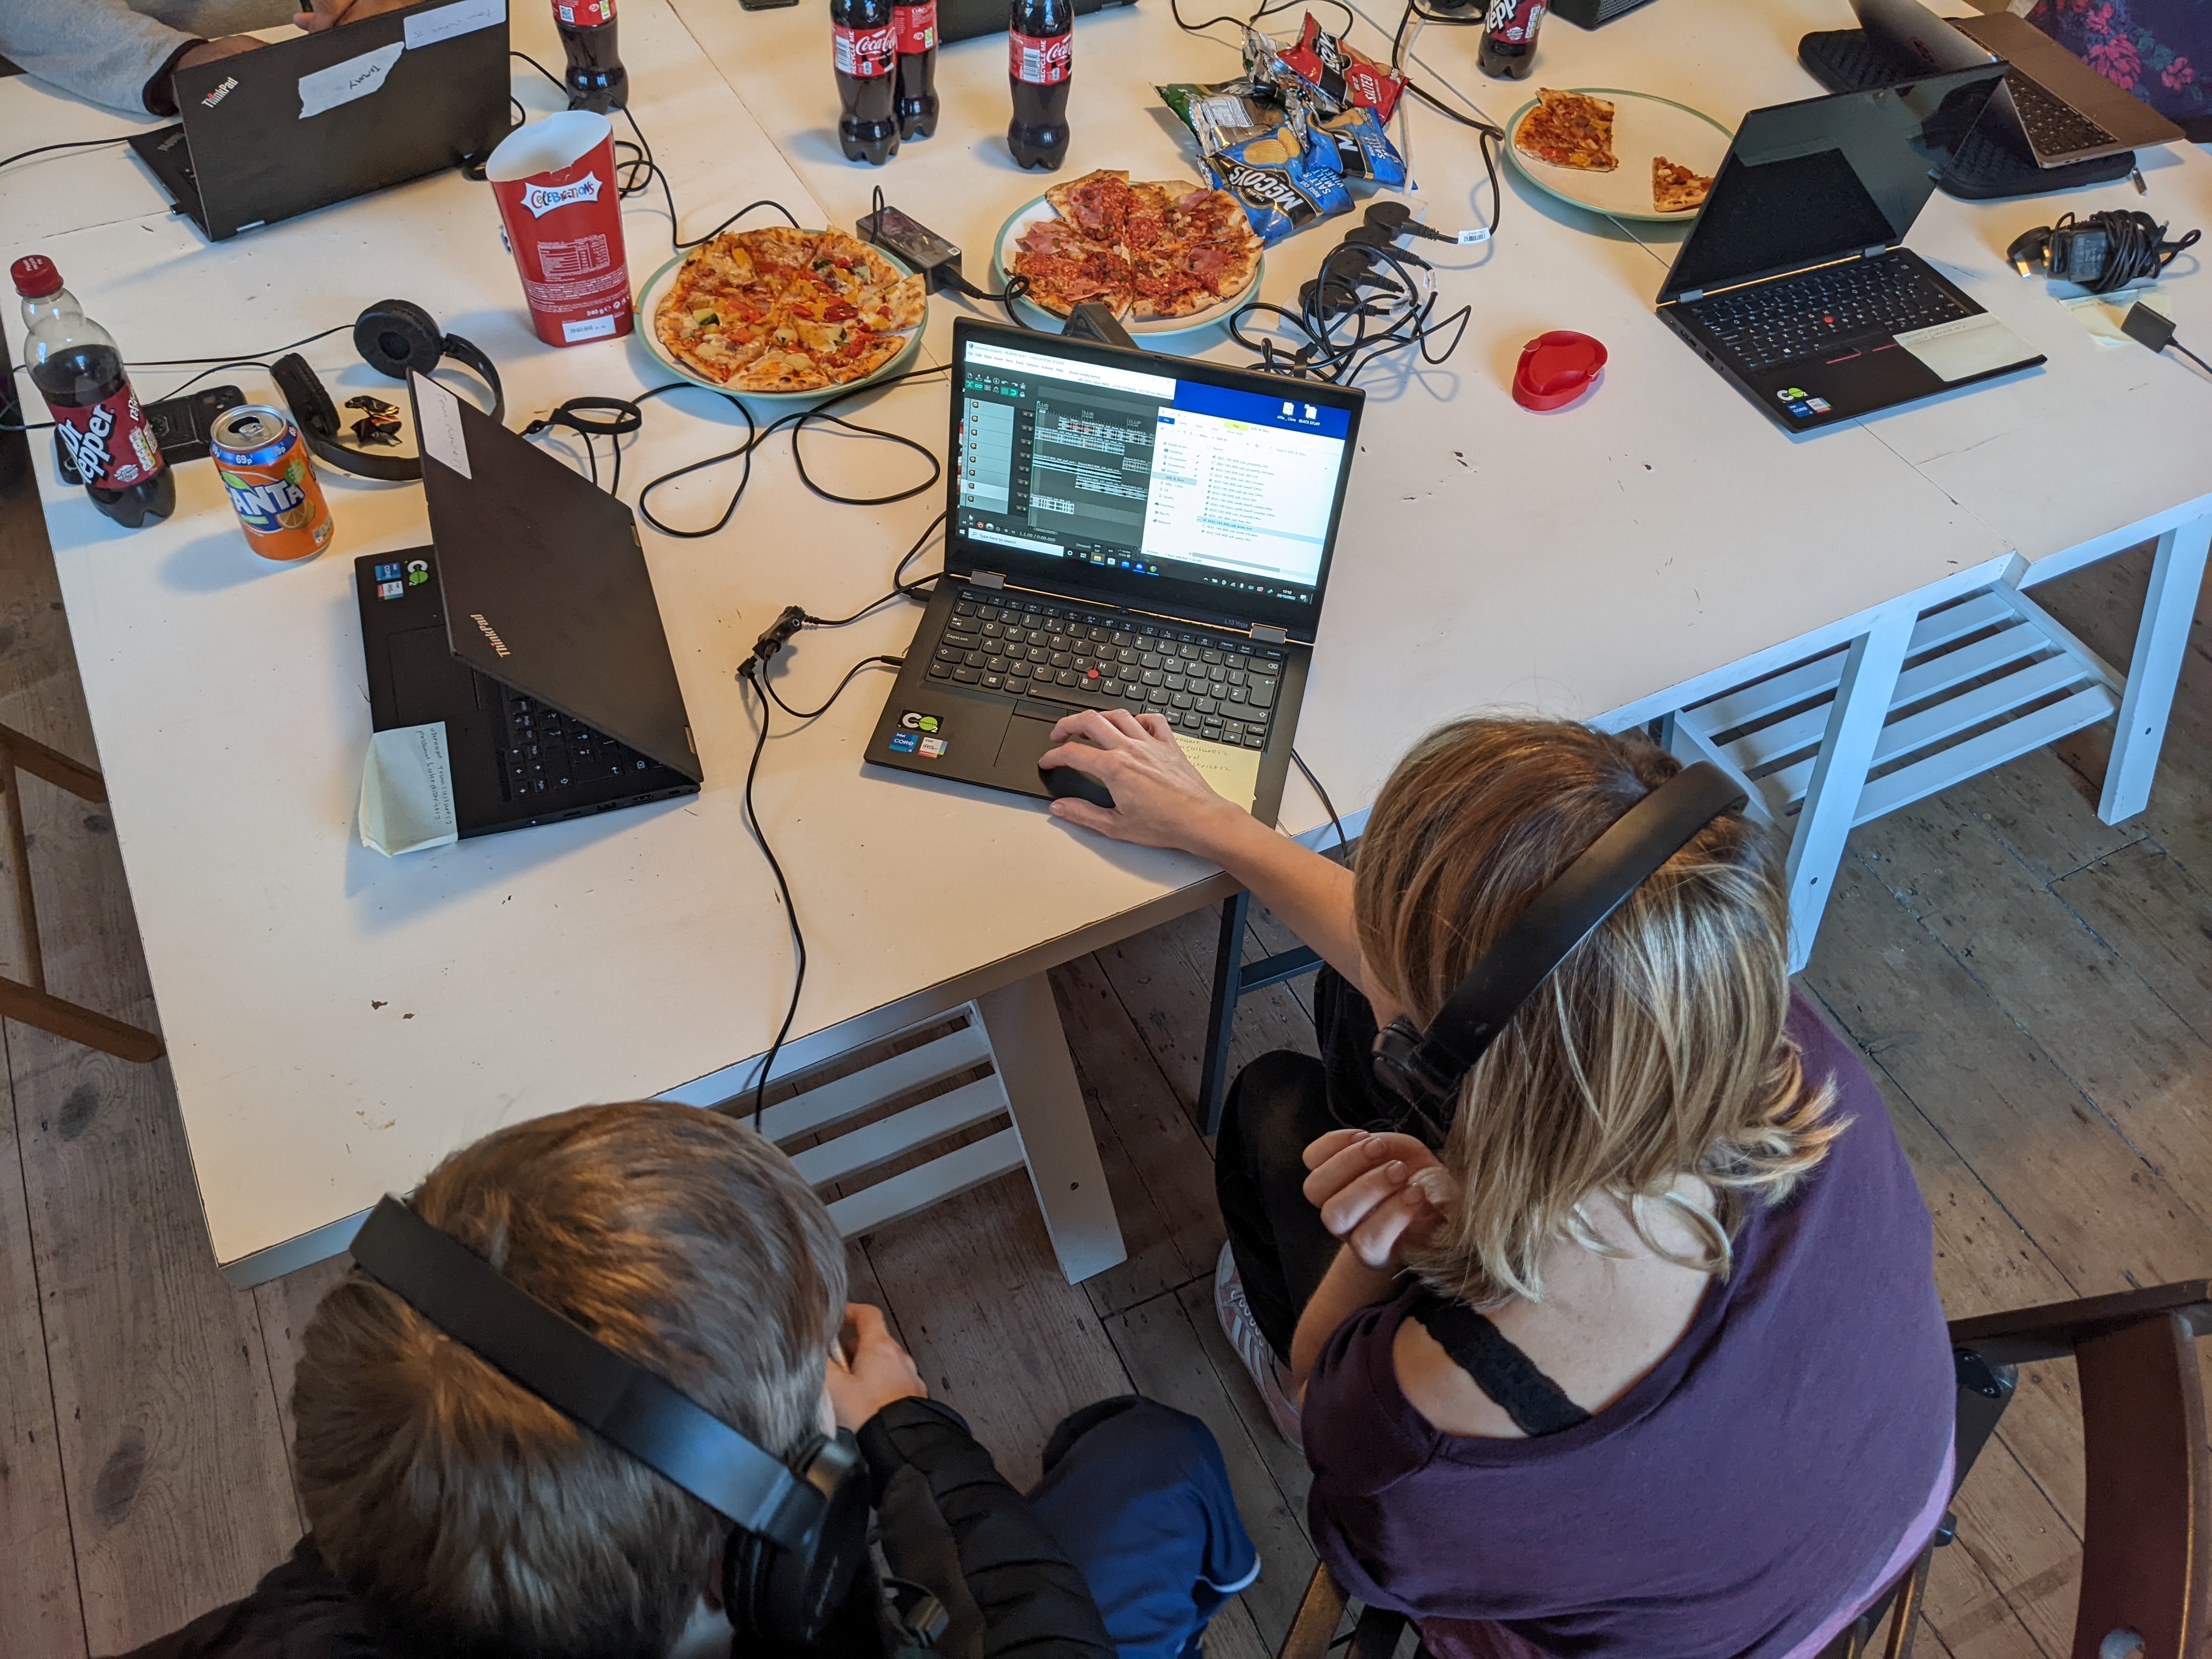 2 people editing sound at a computer with pizza and cola on the table next to them